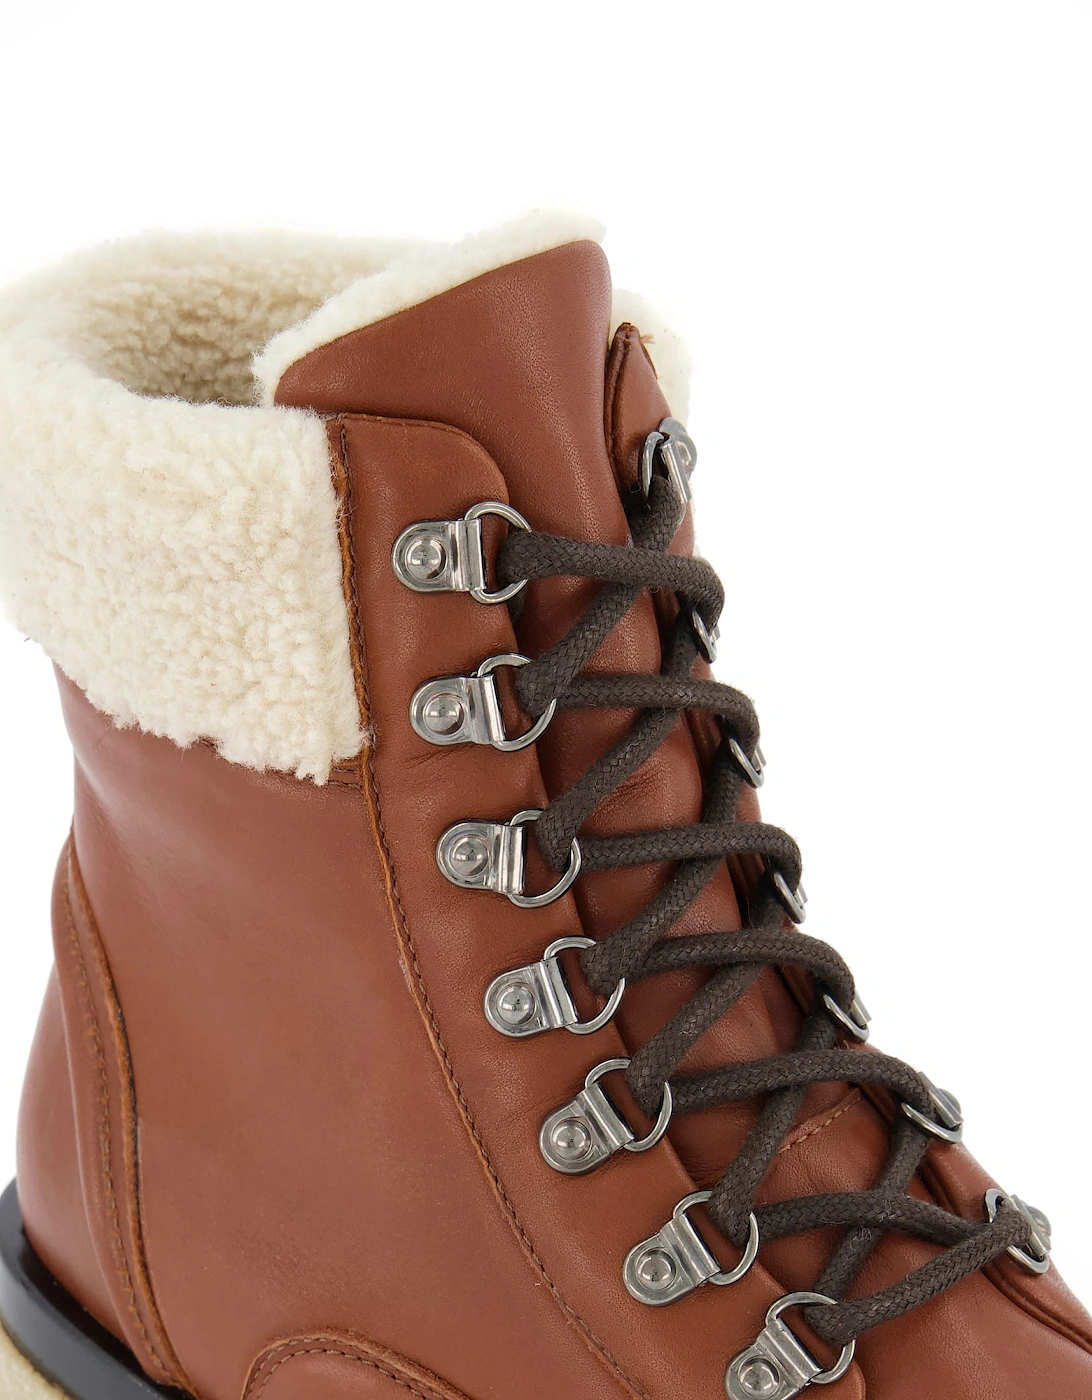 Ladies Pattons - Warm Lined Leather Hiking Boots